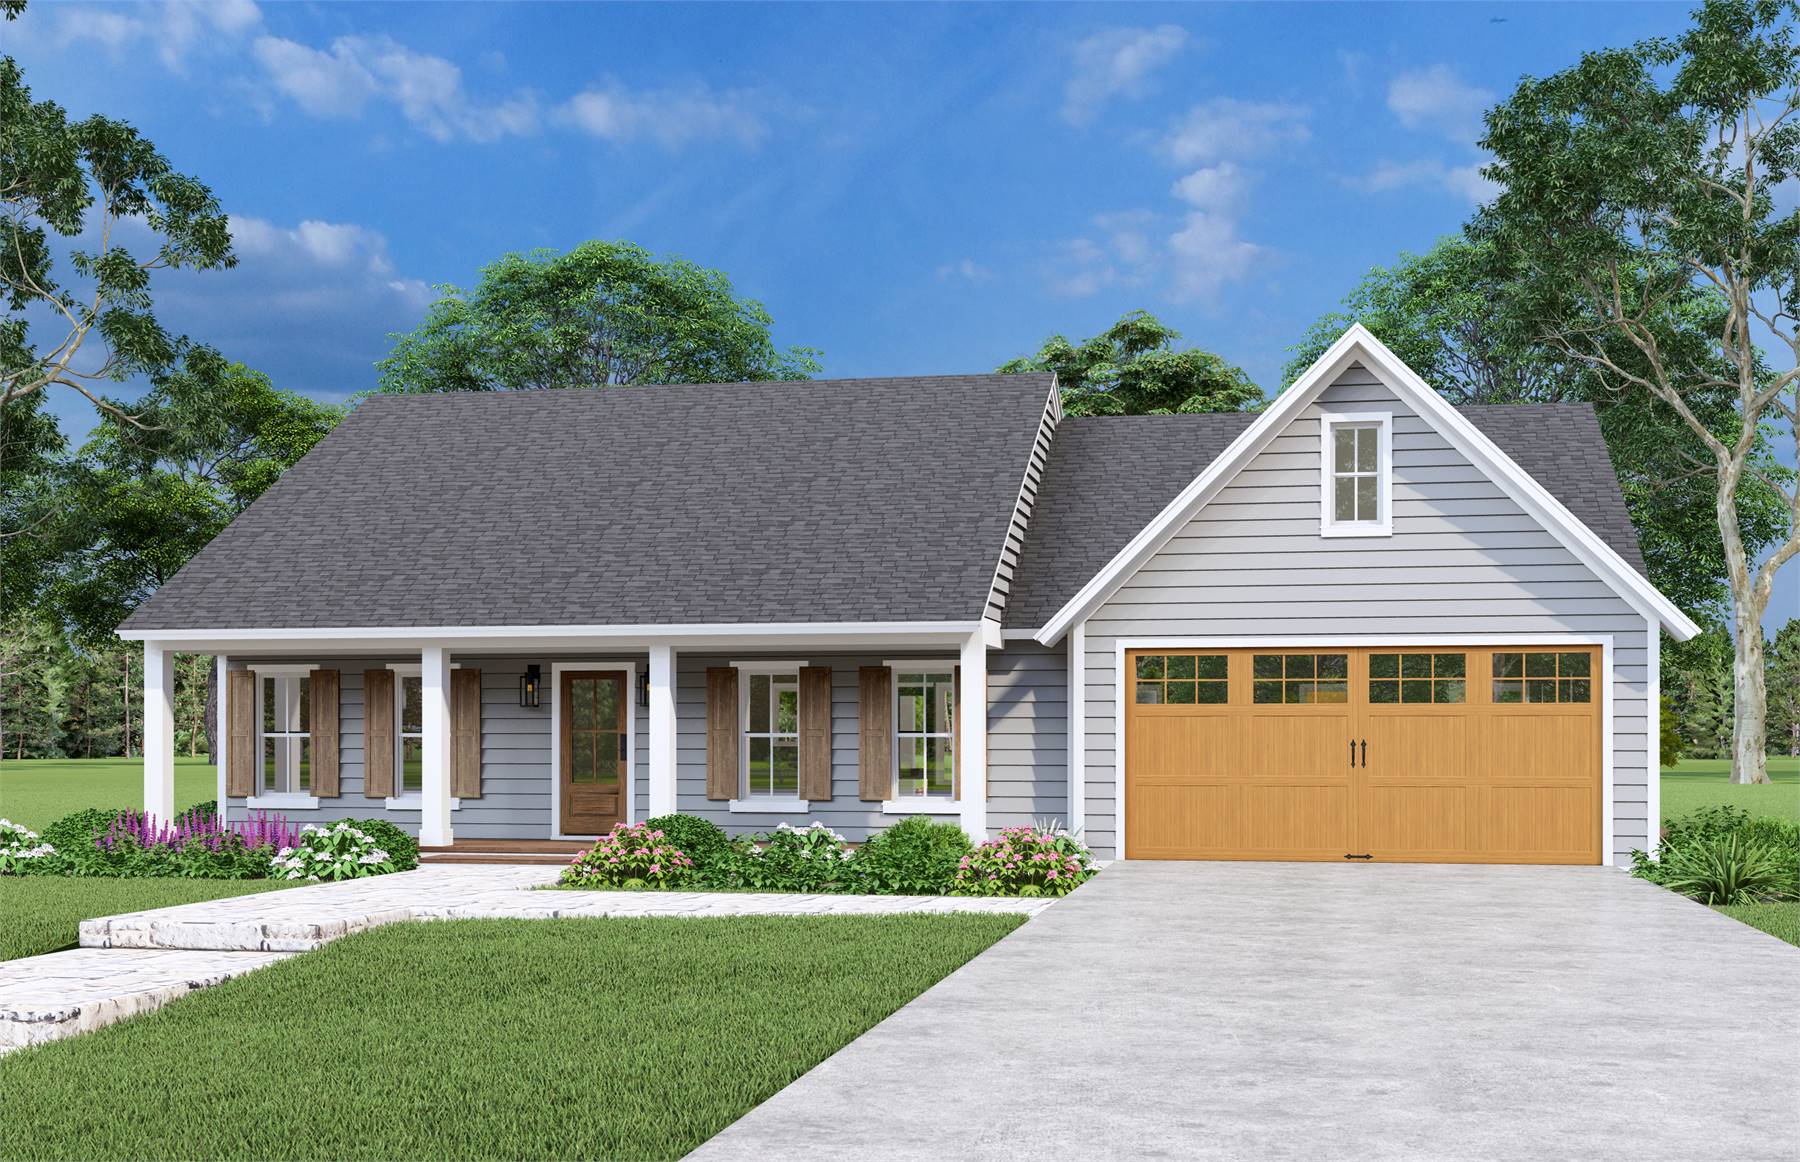 Affordable & Charming Ranch with Covered Front Entry image of Stonebrook House Plan